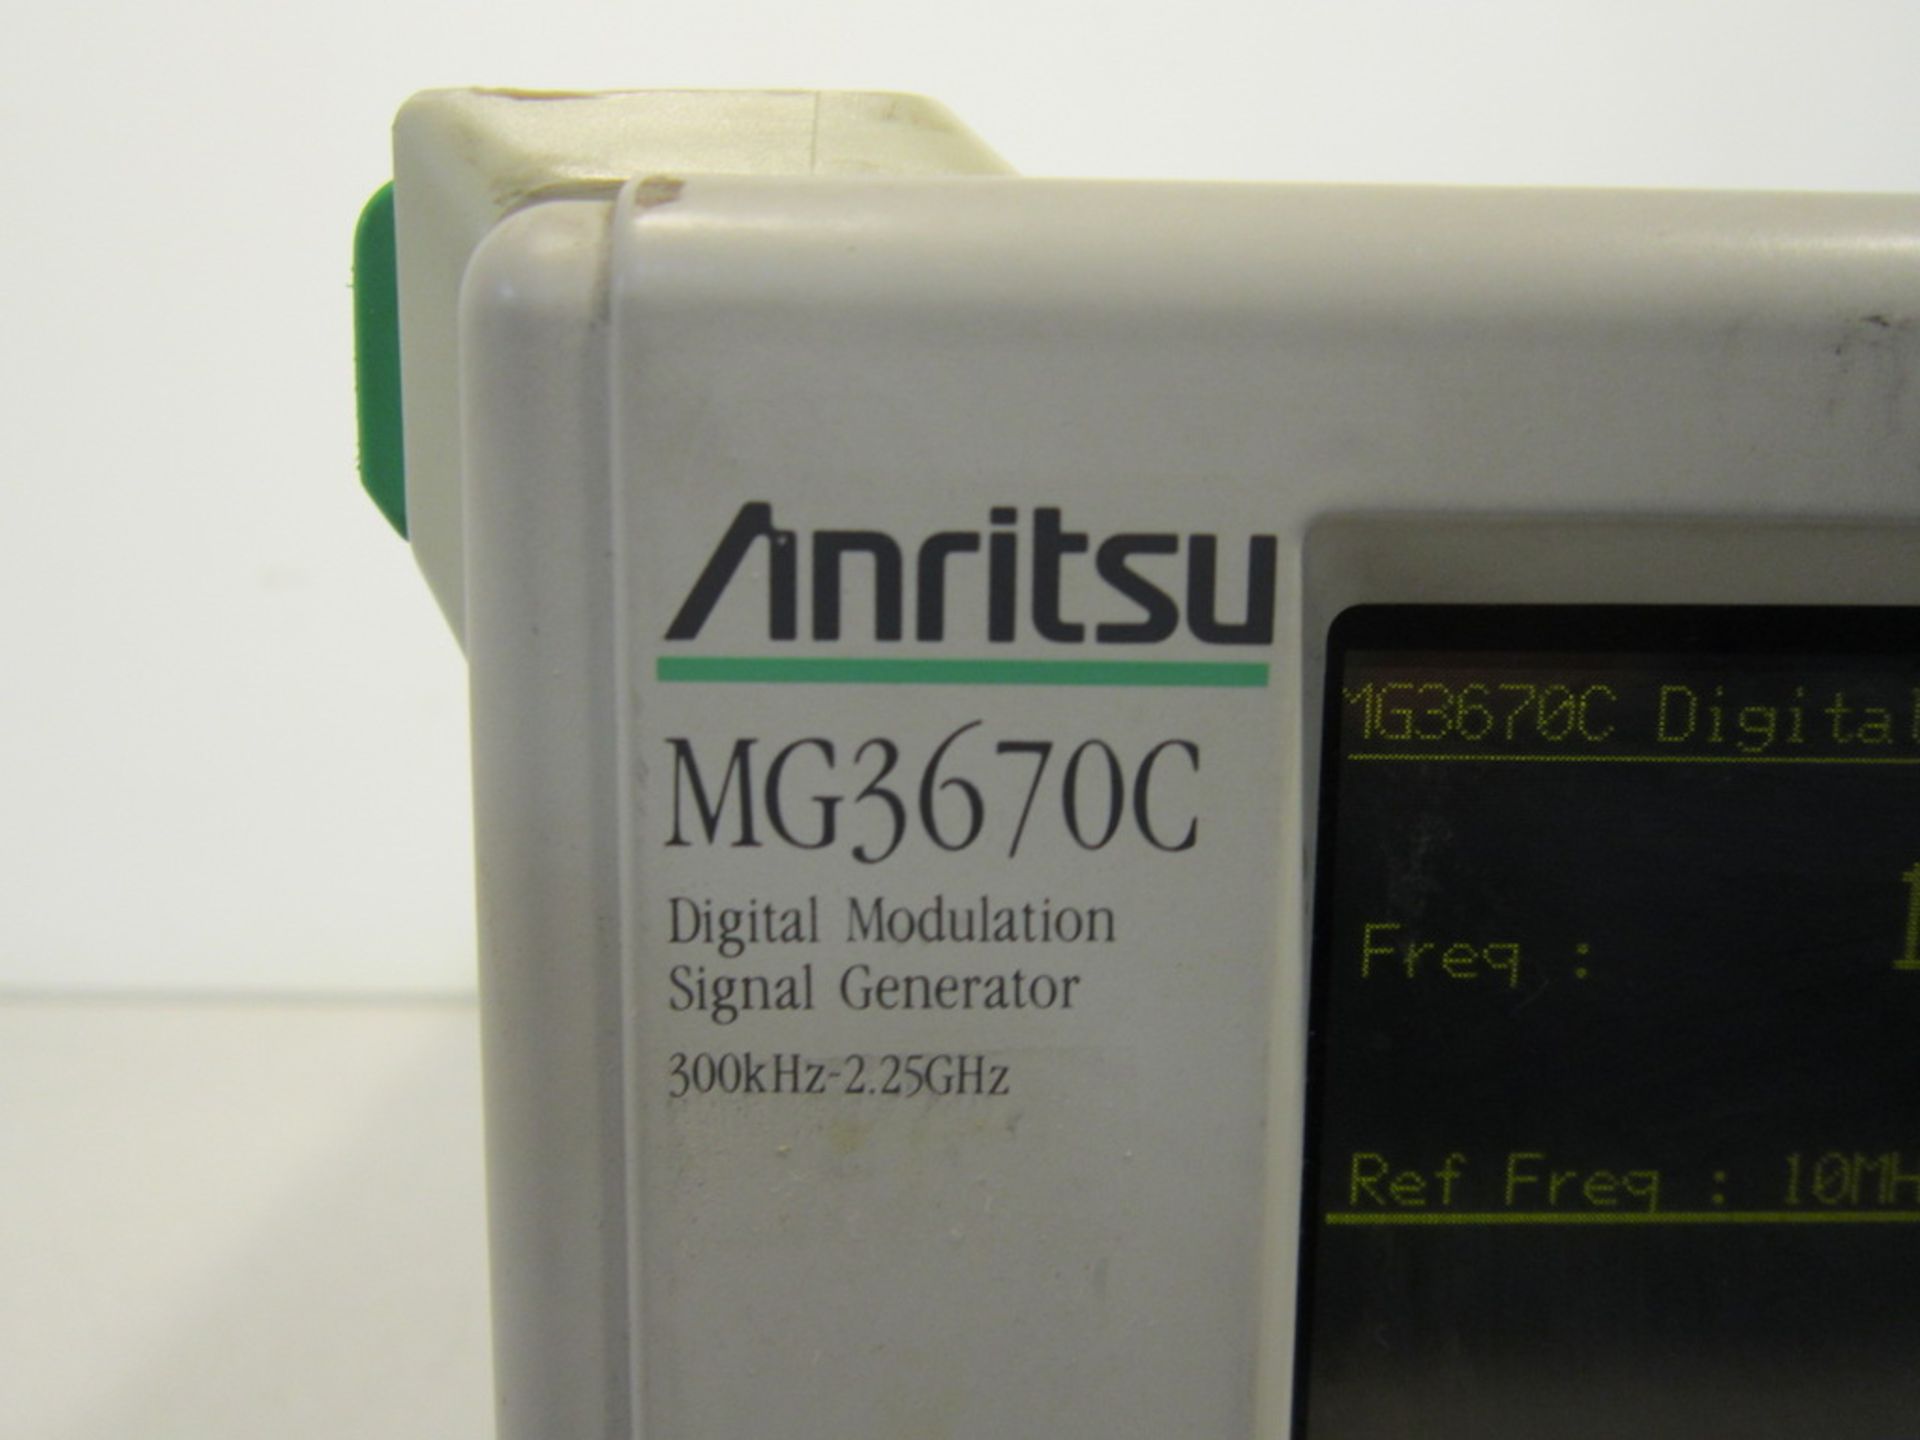 Anritsu Mg3670C Digital Modulation Signal Generator. one unit used for pictures serial numbers - Image 9 of 9